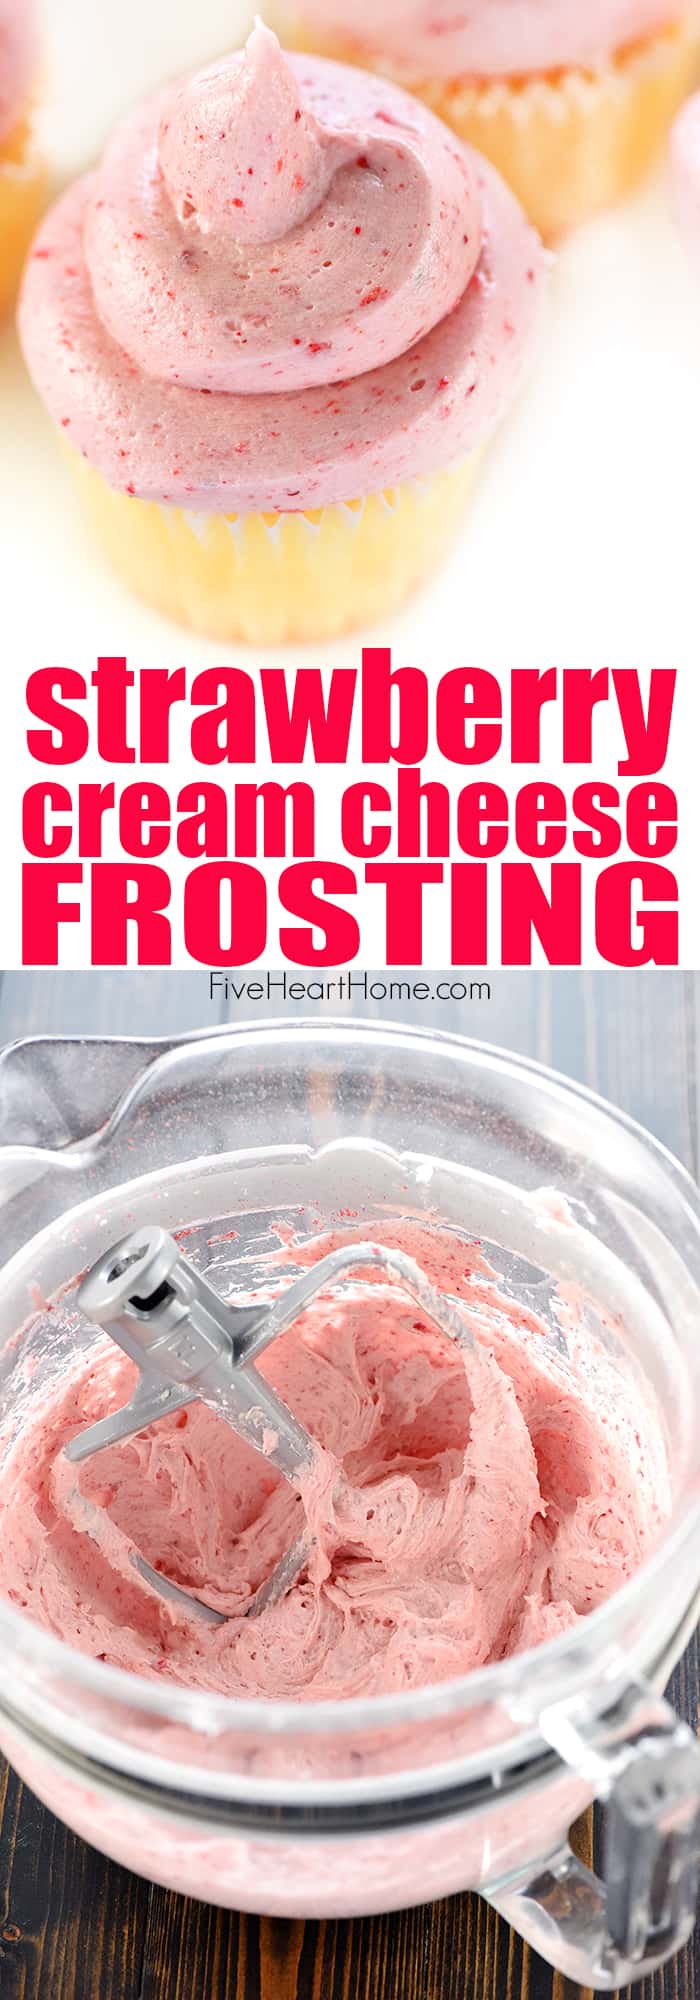 Strawberry Cream Cheese Frosting ~ thick, silky, and bursting with strawberry flavor thanks to a special ingredient...crushed, freeze-dried strawberries! | FiveHeartHome.com via @fivehearthome